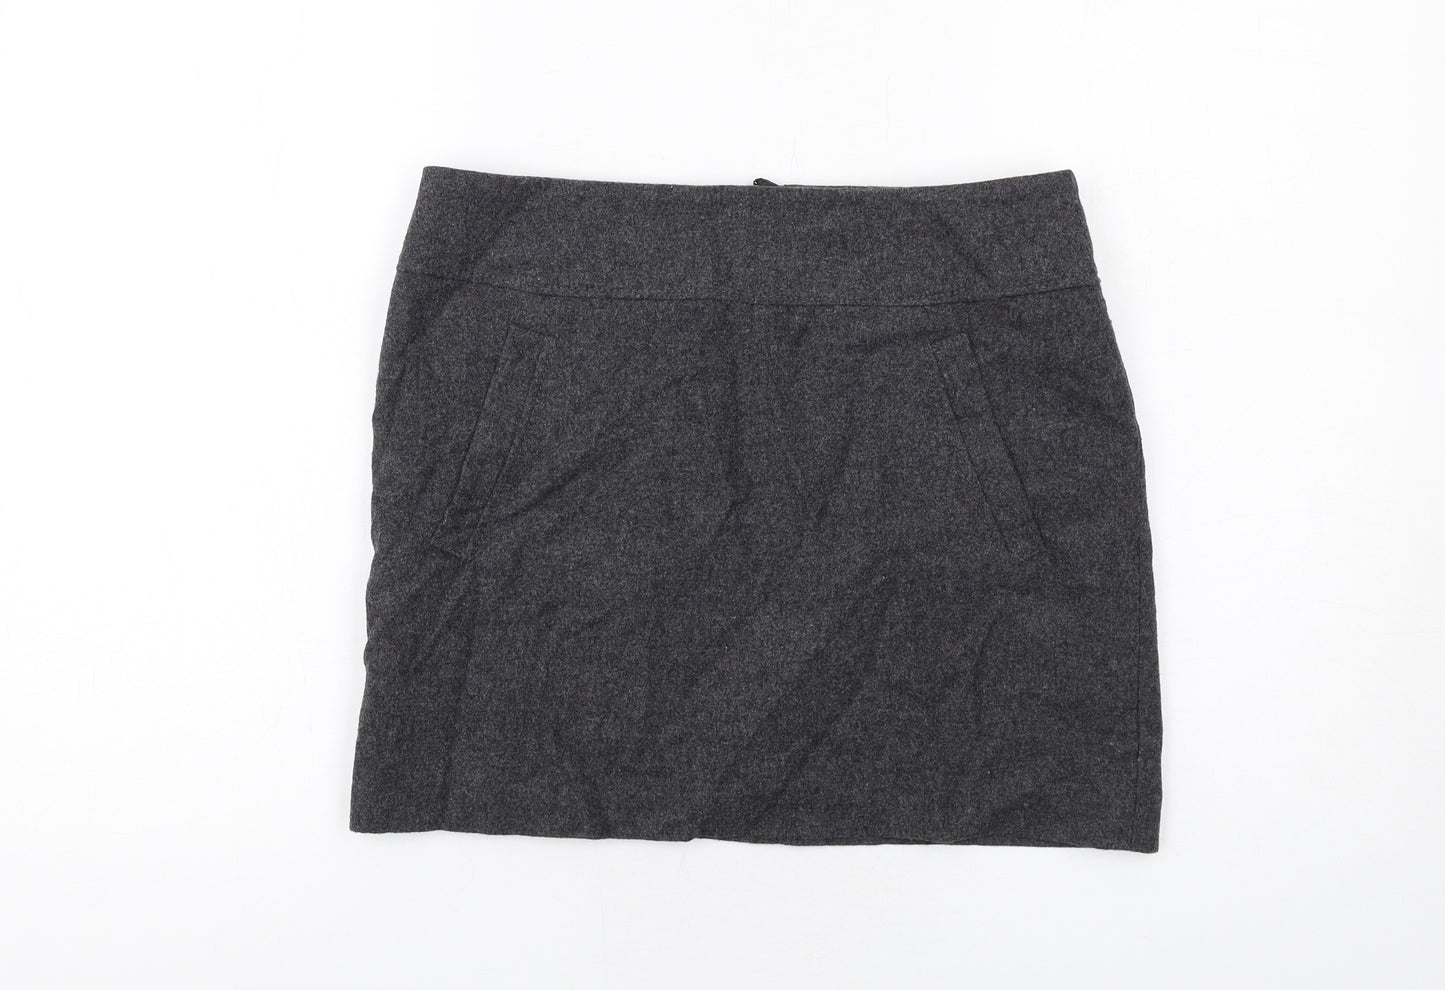 H&M Womens Grey Polyester A-Line Skirt Size 10 Zip